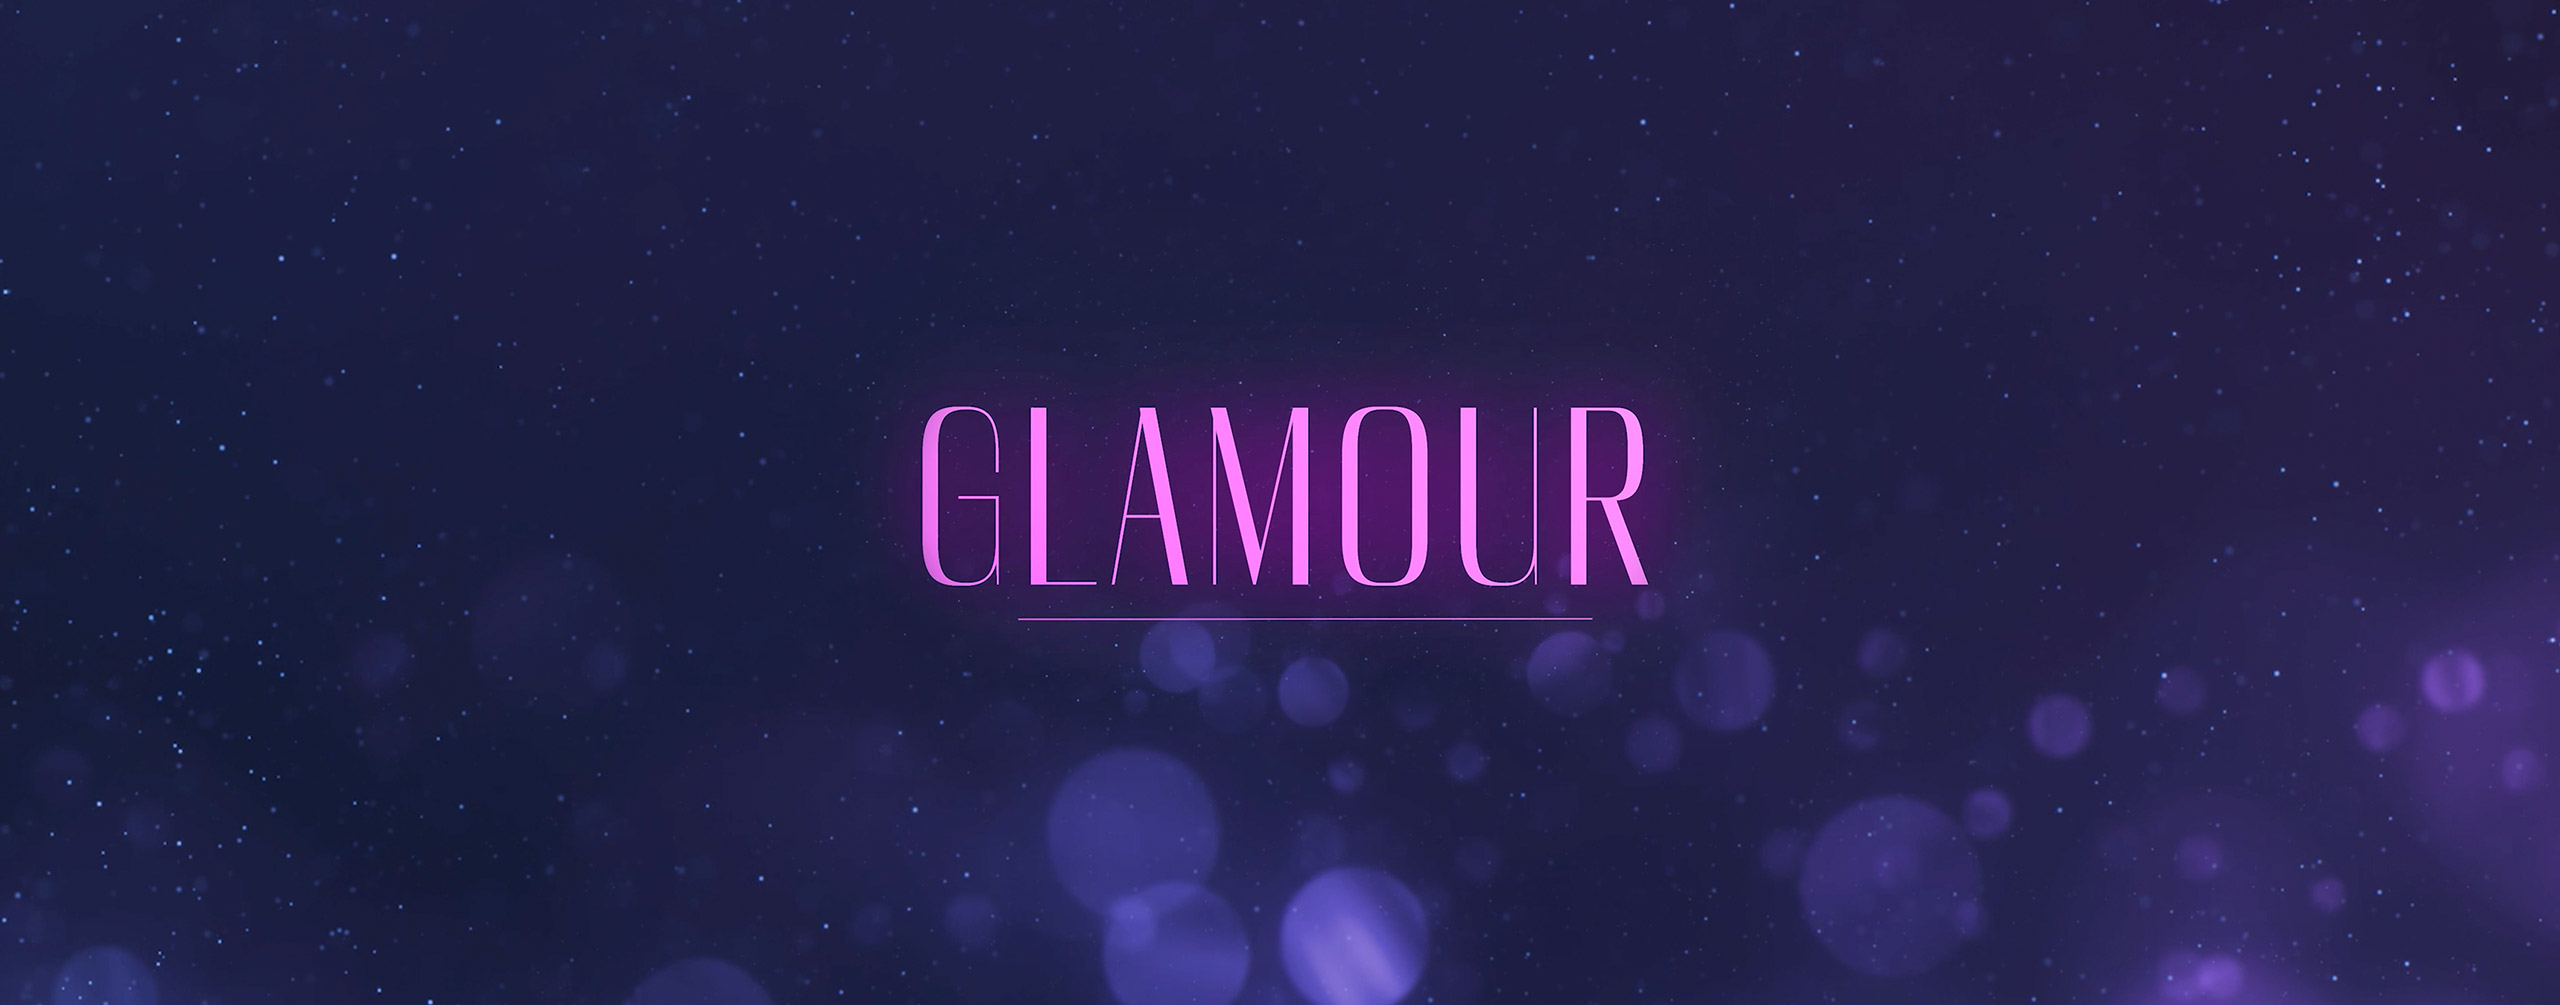 Glamour - Effects for Fashion and Makeup Videos